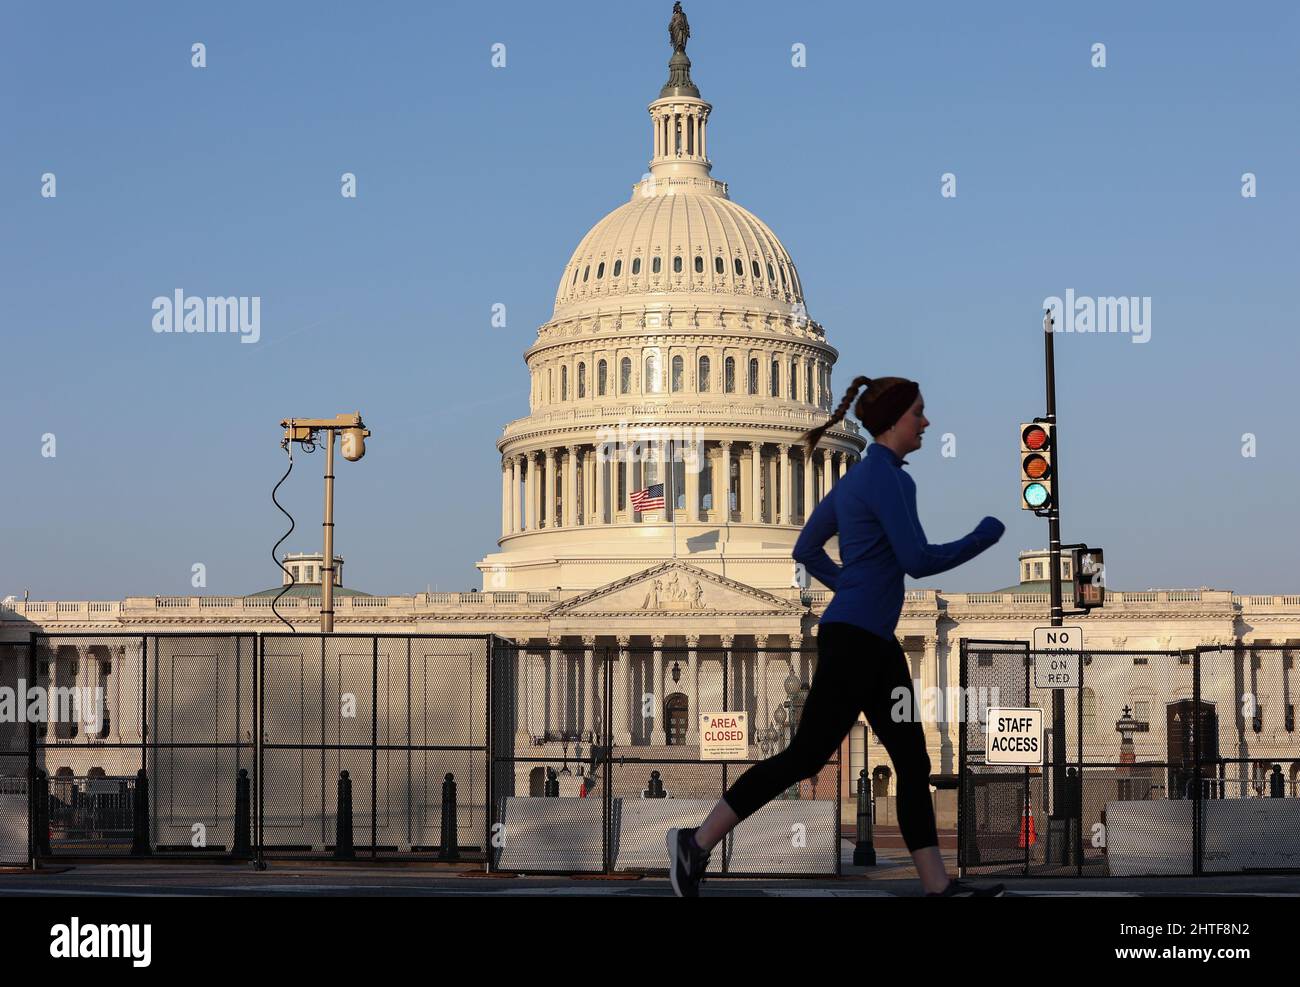 Washington, United States. 28th Feb, 2022. A jogger runs past the US Capitol Building in Washington DC on Monday, February 28, 2022. Fencing was erected by the US Capitol Police once before following the January 6, 2021 riots and was reinstalled this year prior to the March 1, 2022 State of The Union address by President Biden and the arrival of a trucker caravan coming to Washington DC to protest COVID restrictions. Photo by Jemal Countess/UPI Credit: UPI/Alamy Live News Stock Photo